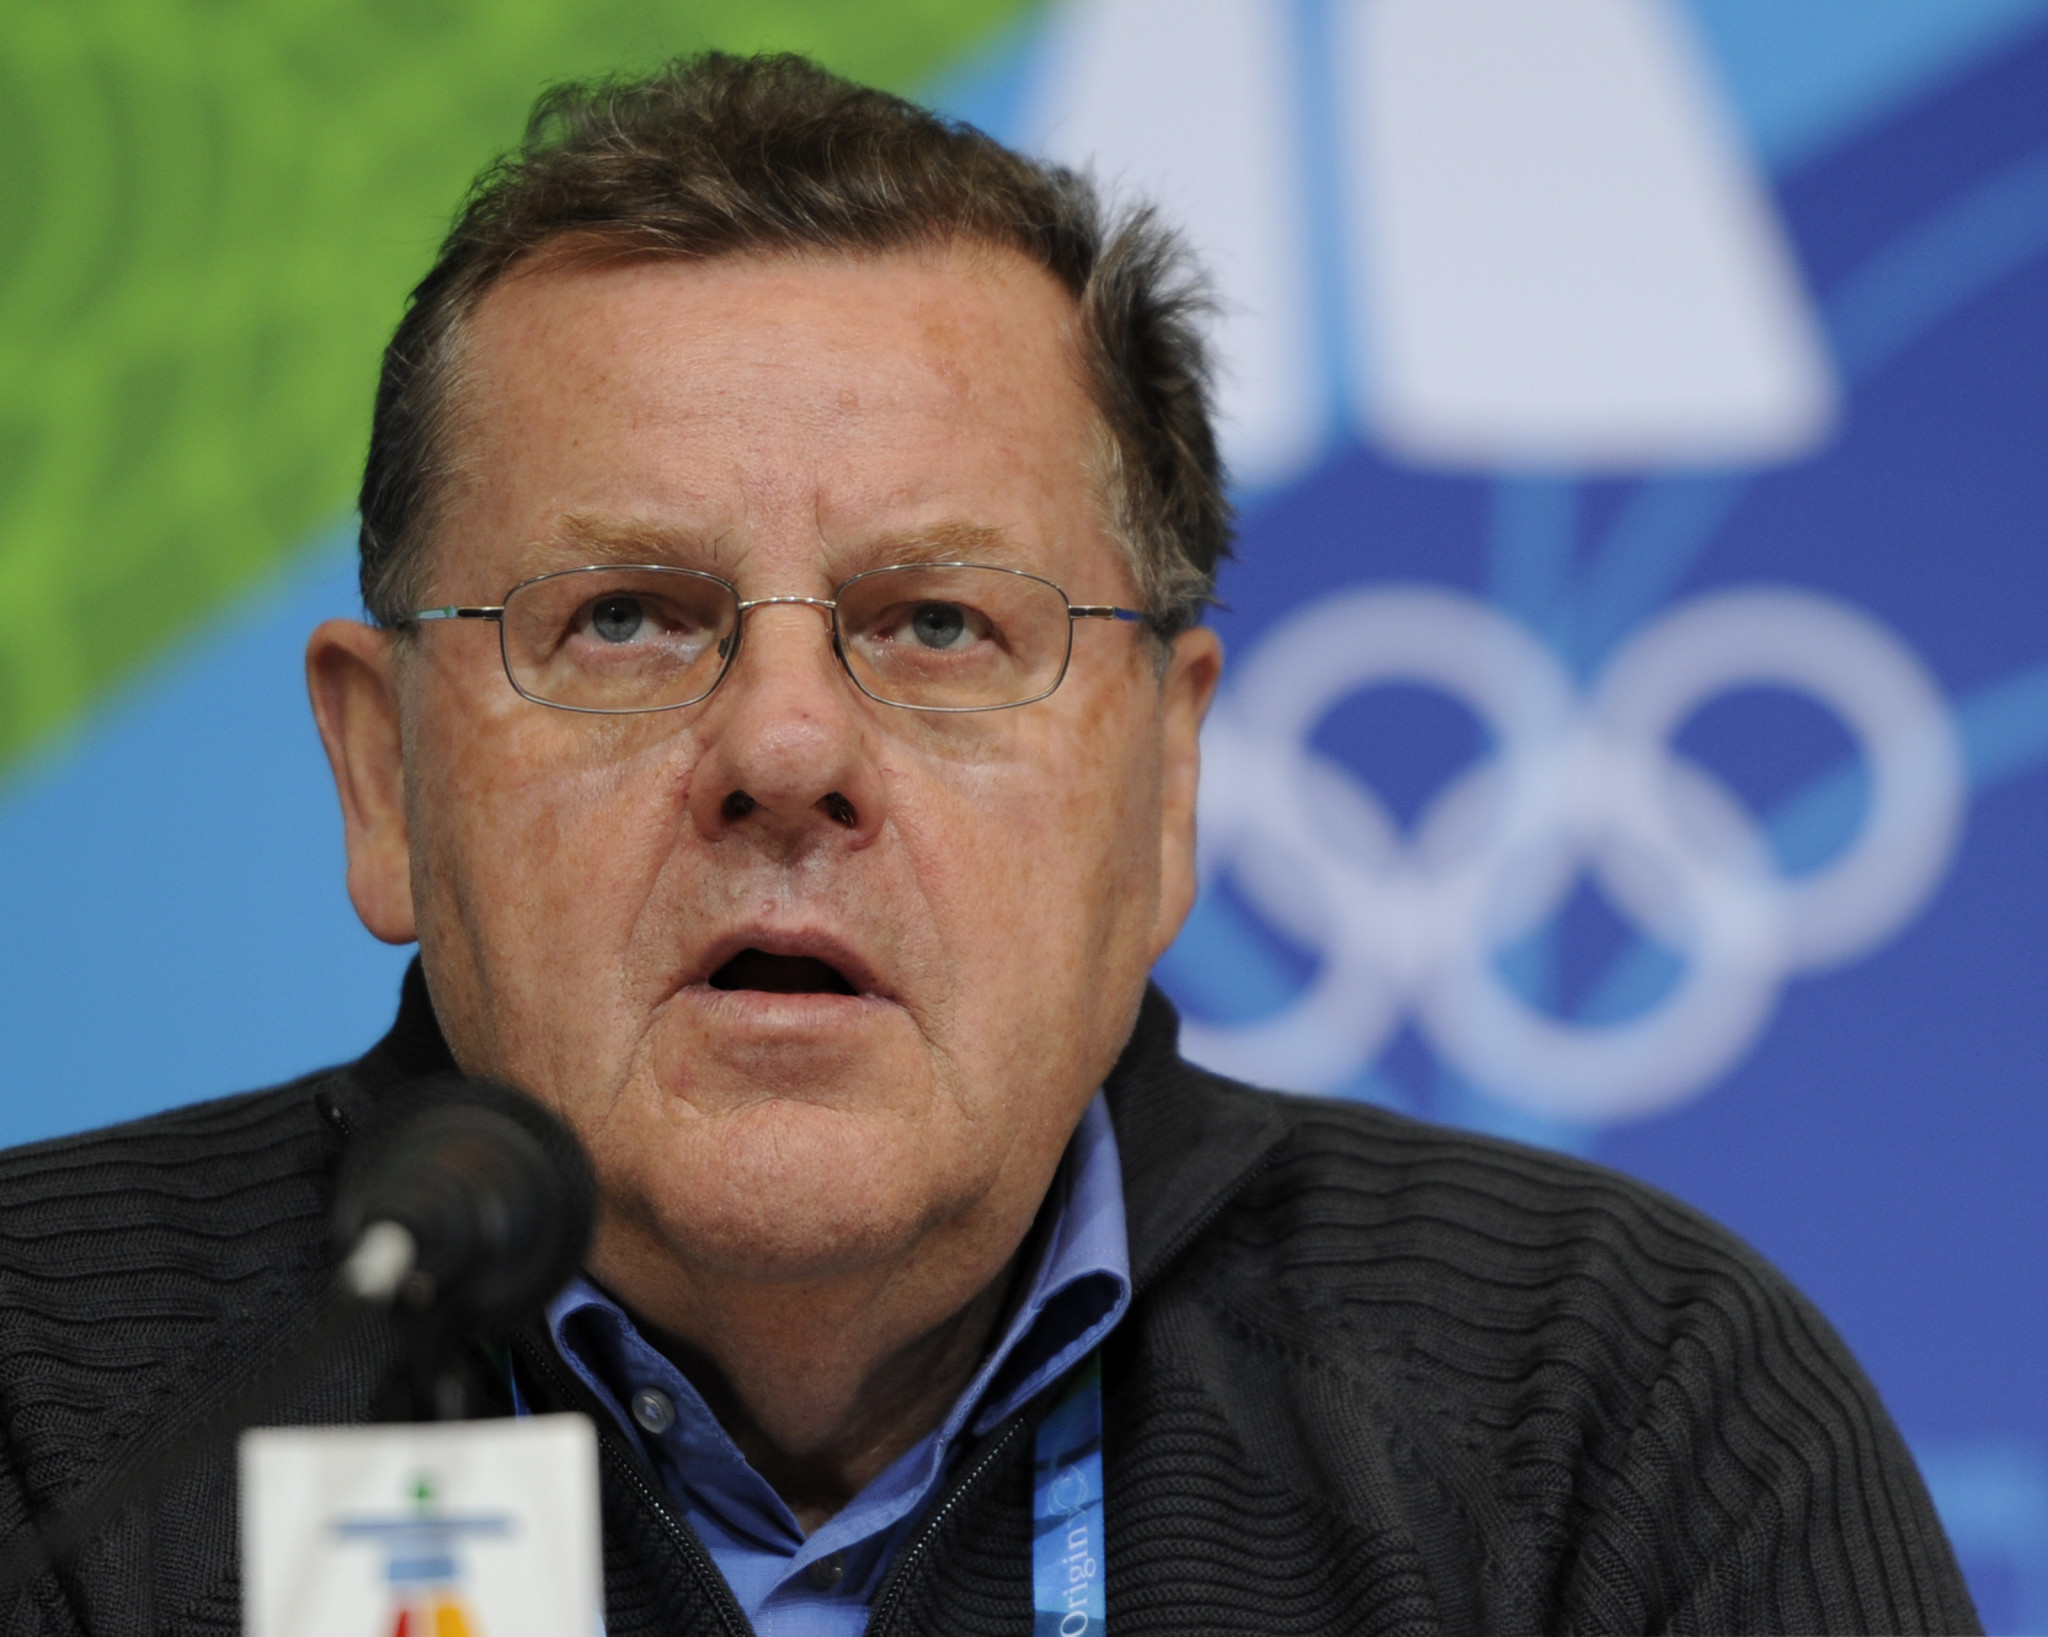 International Luge Federation President Josef Fendt is set to stay in the post for longer than initially planned ©Getty Images